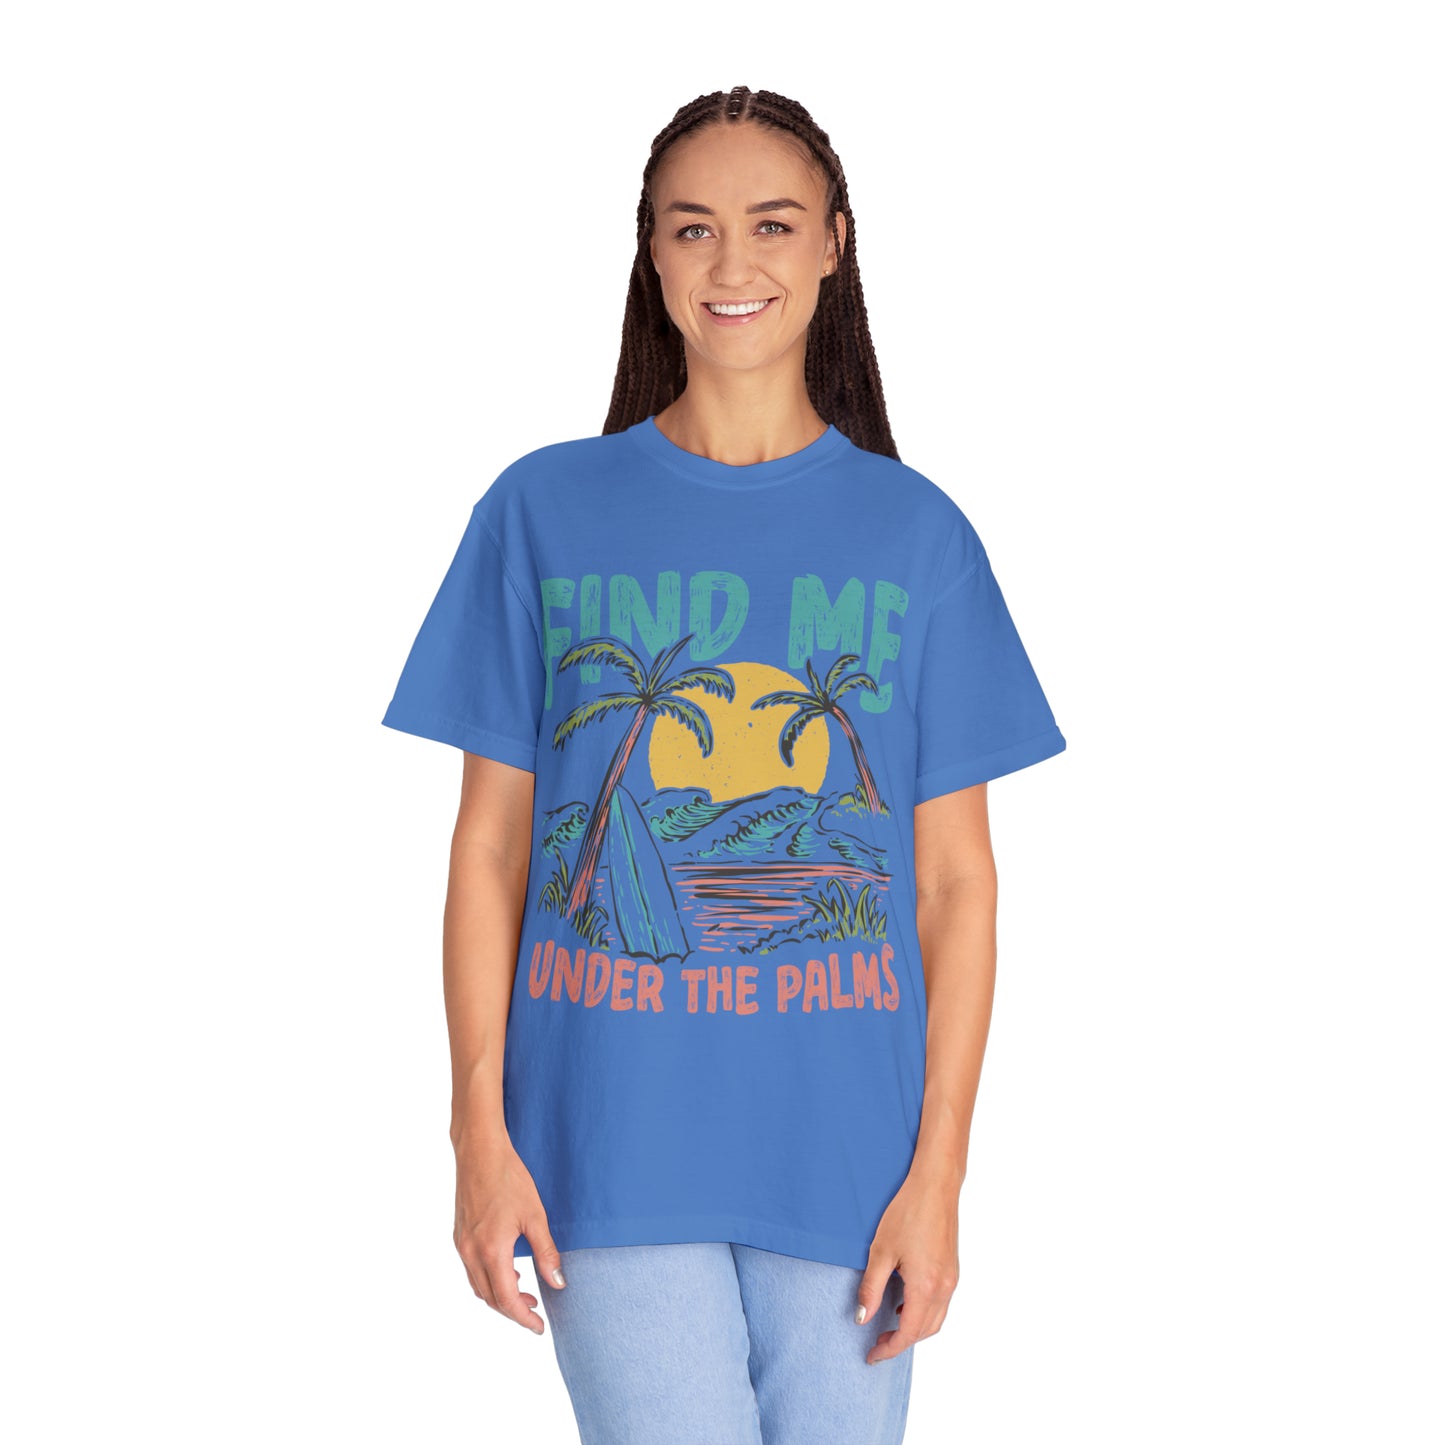 "Find Me Under The Palms" Comfort Colors Oversized T-shirt